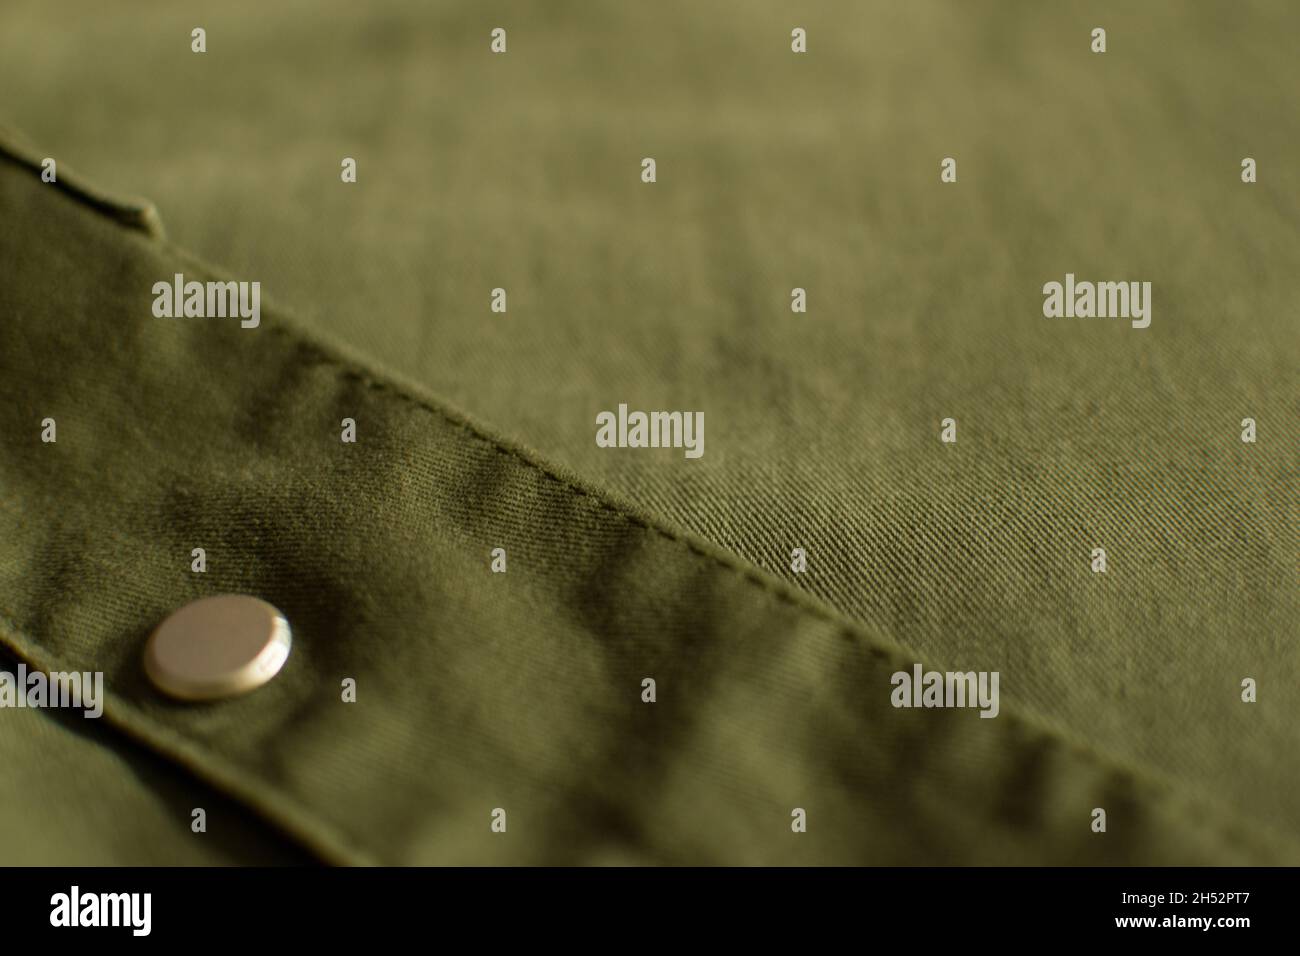 Close up of olive green military uniform fabric with metal button Stock Photo